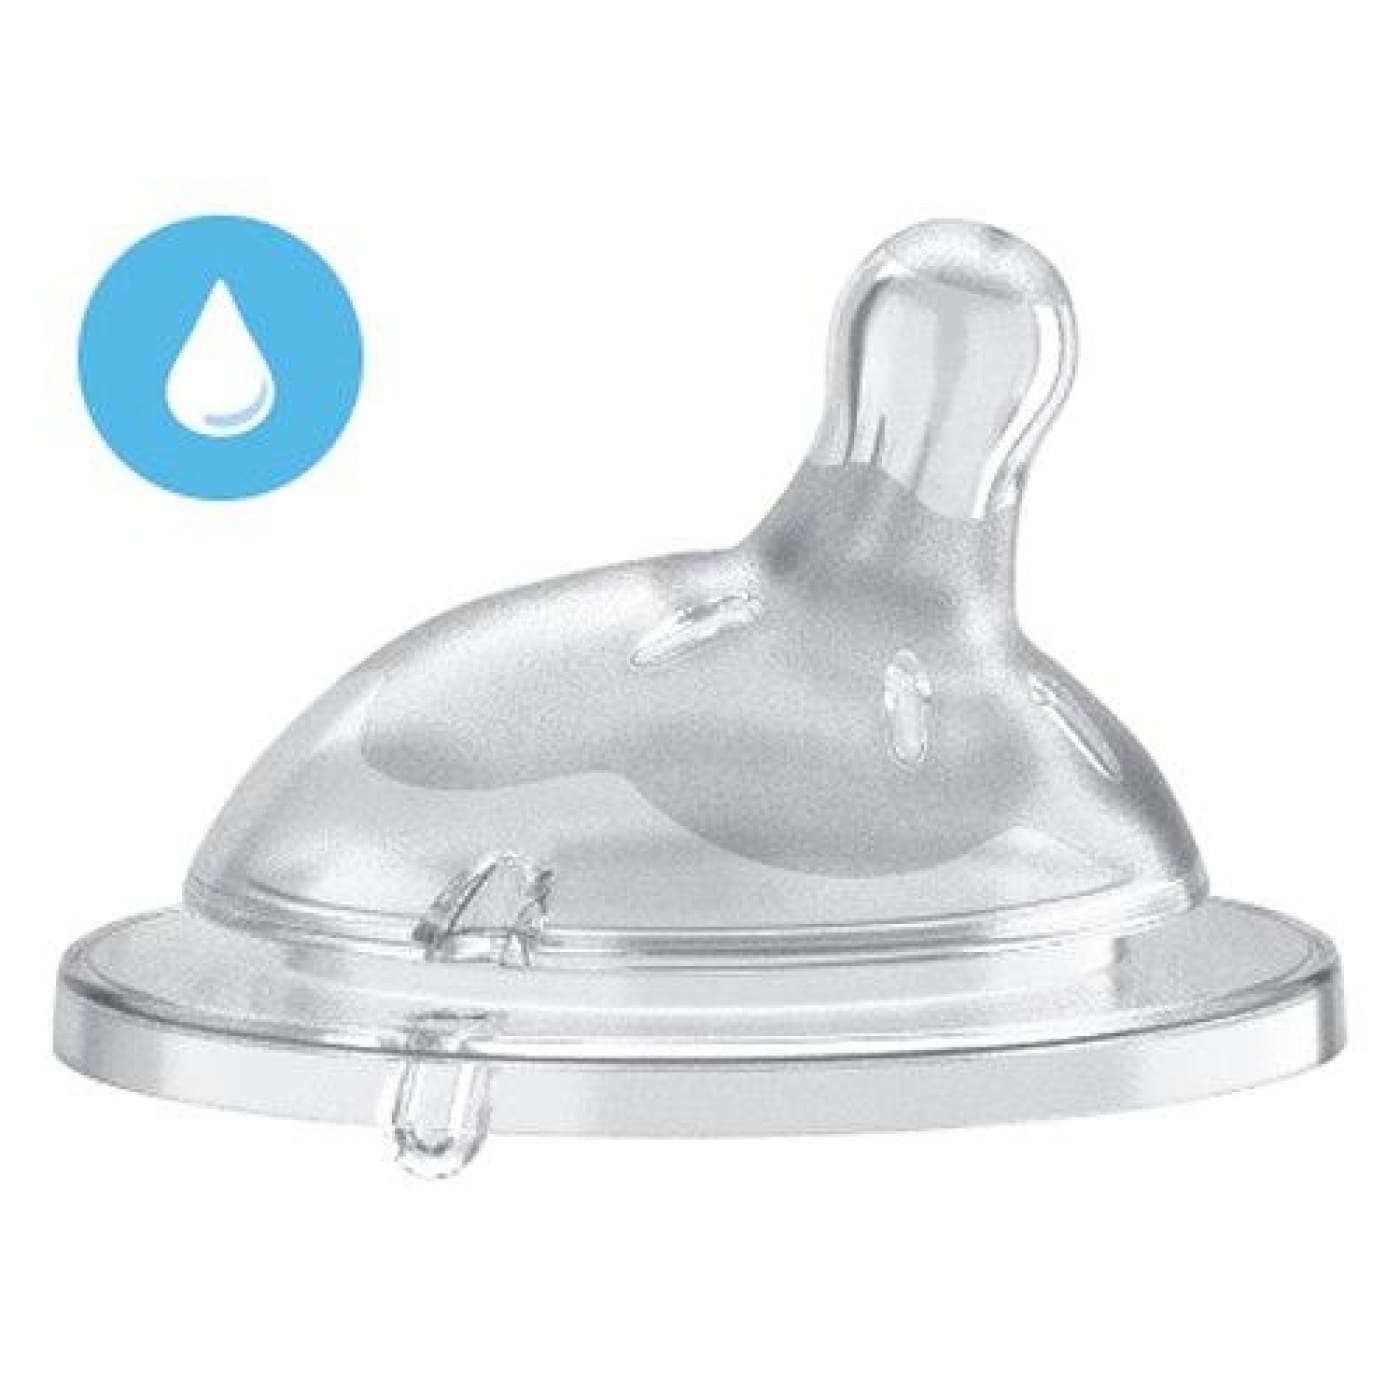 Chicco Natural Feeling Silicone Teat 0M+ - Regular Flow - NURSING & FEEDING - BOTTLE ACCESSORIES